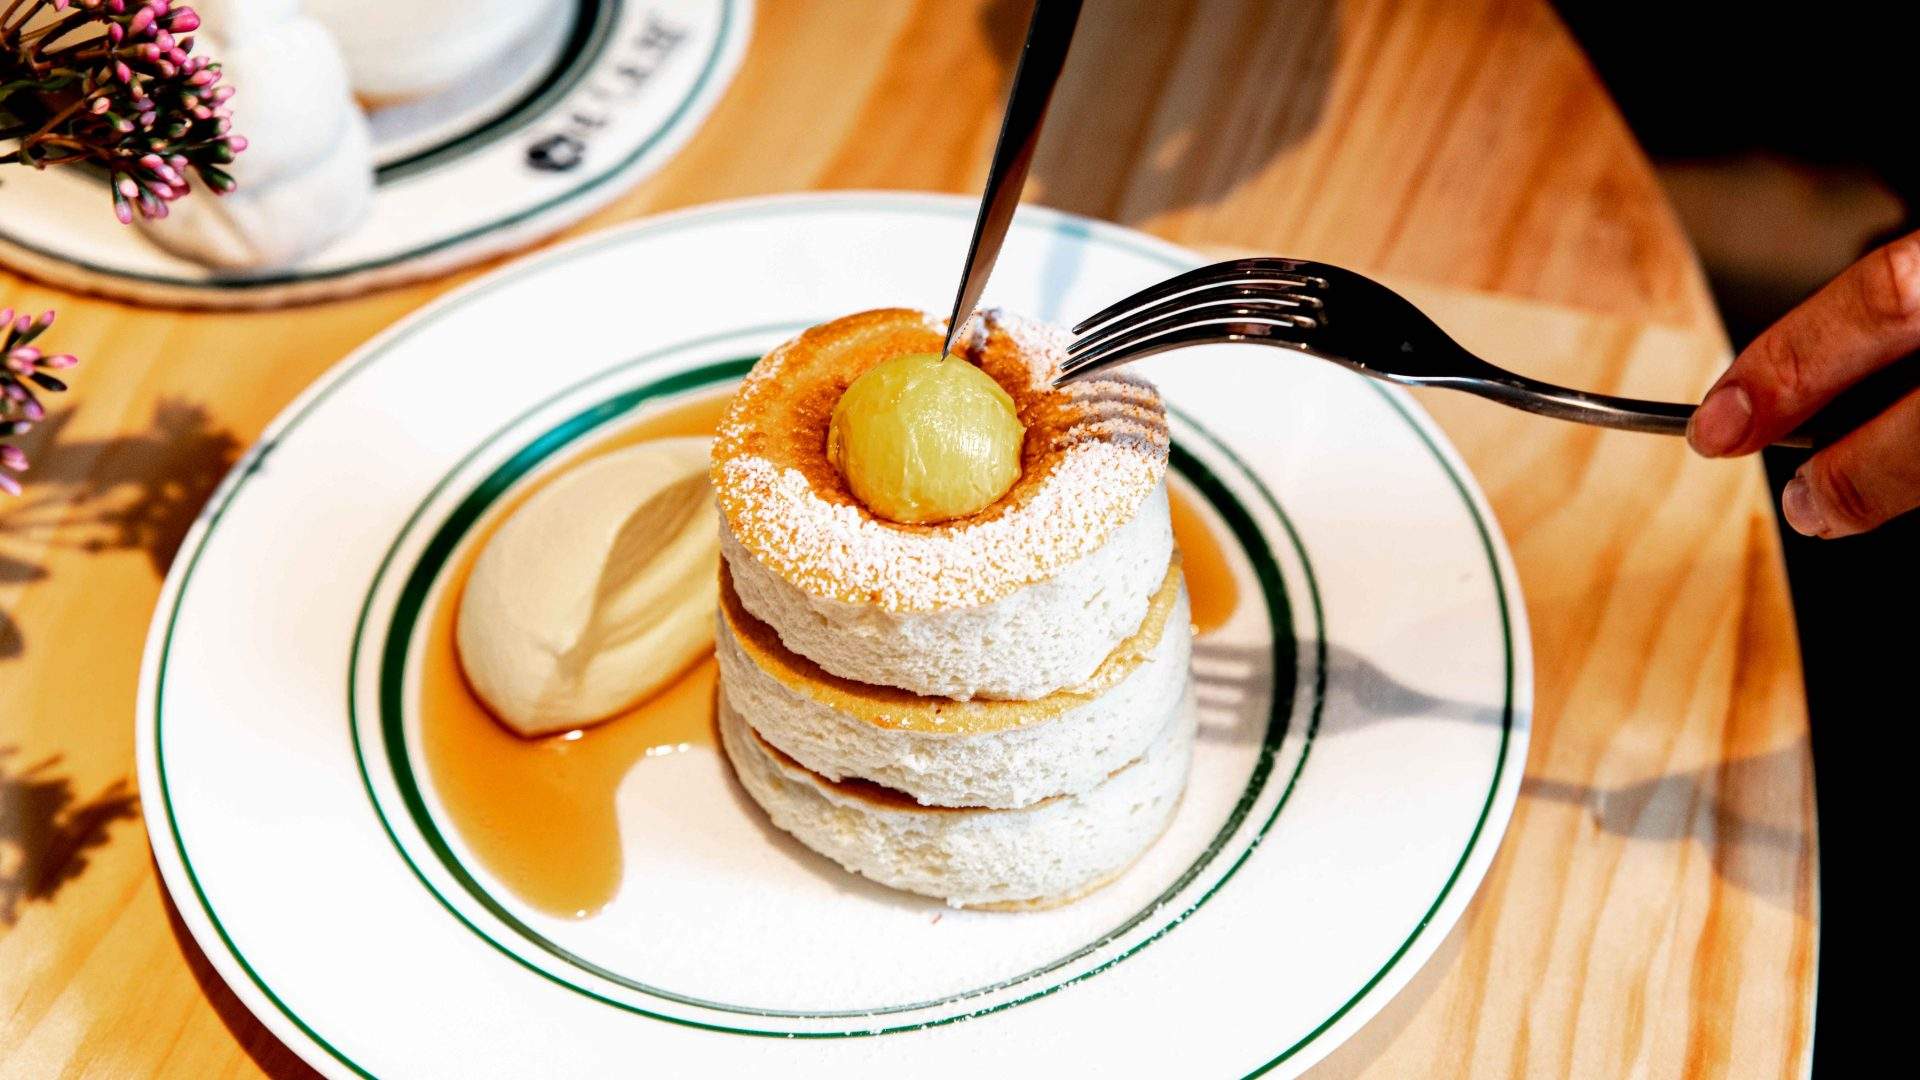 Japanese Souffle Pancake Chain Gram Cafe Has Opened Its First Australian Store in Sydney